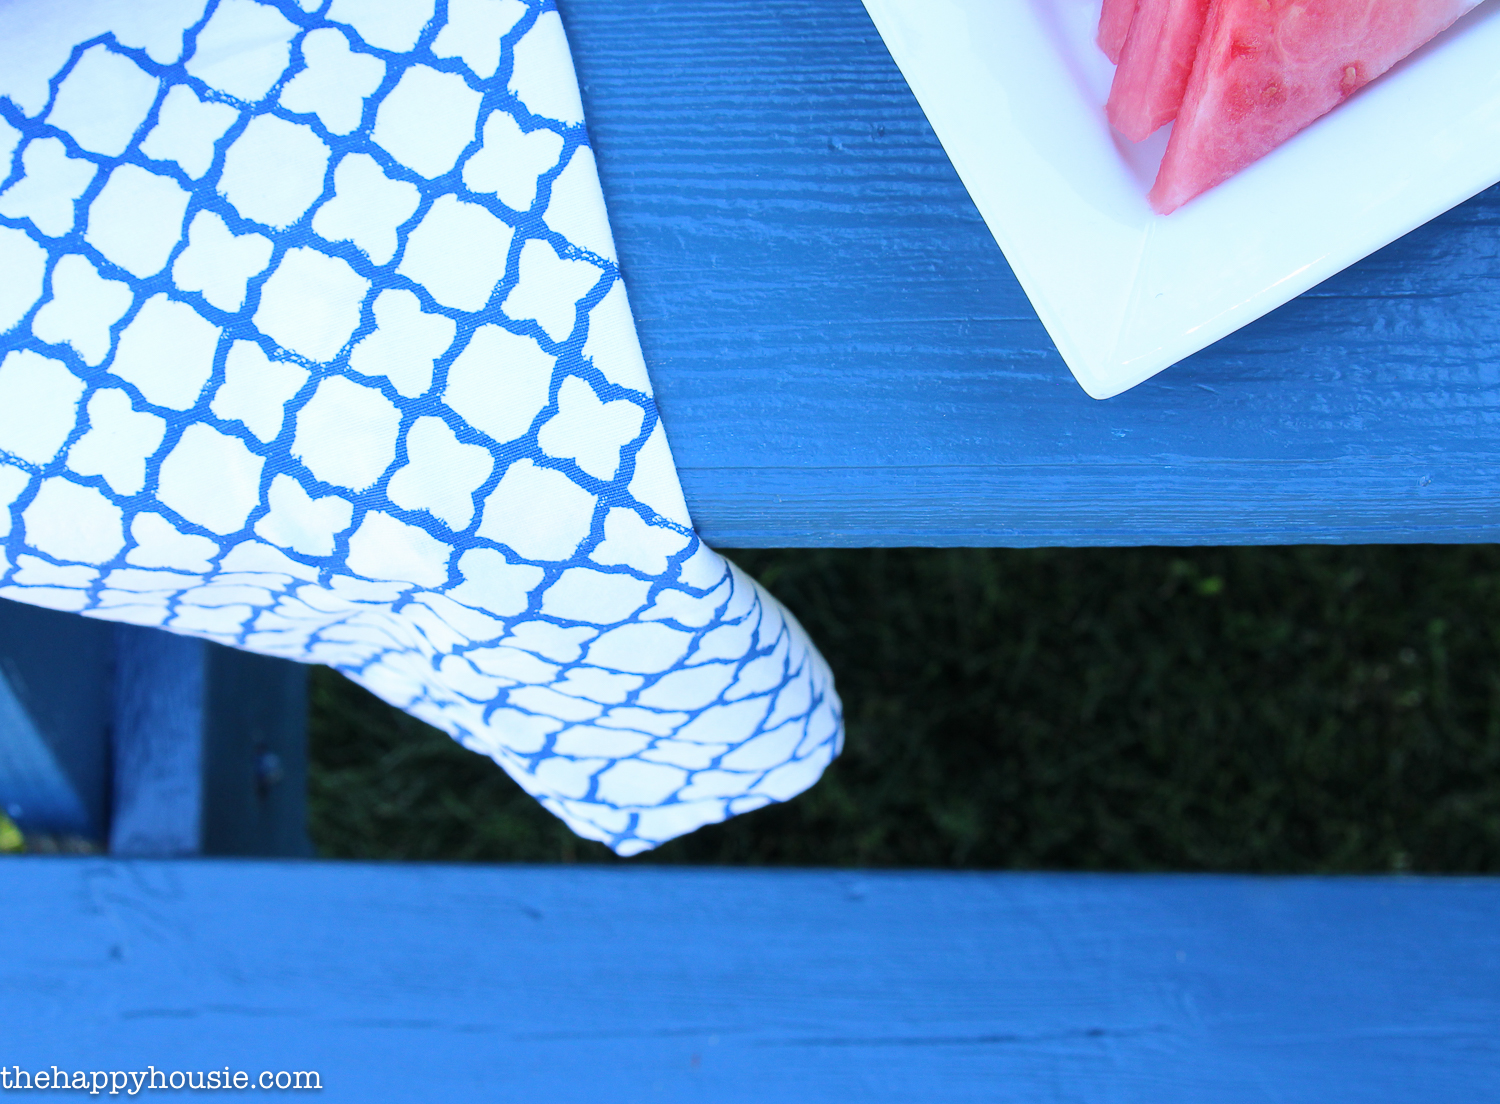 A blue and white tablecloth.